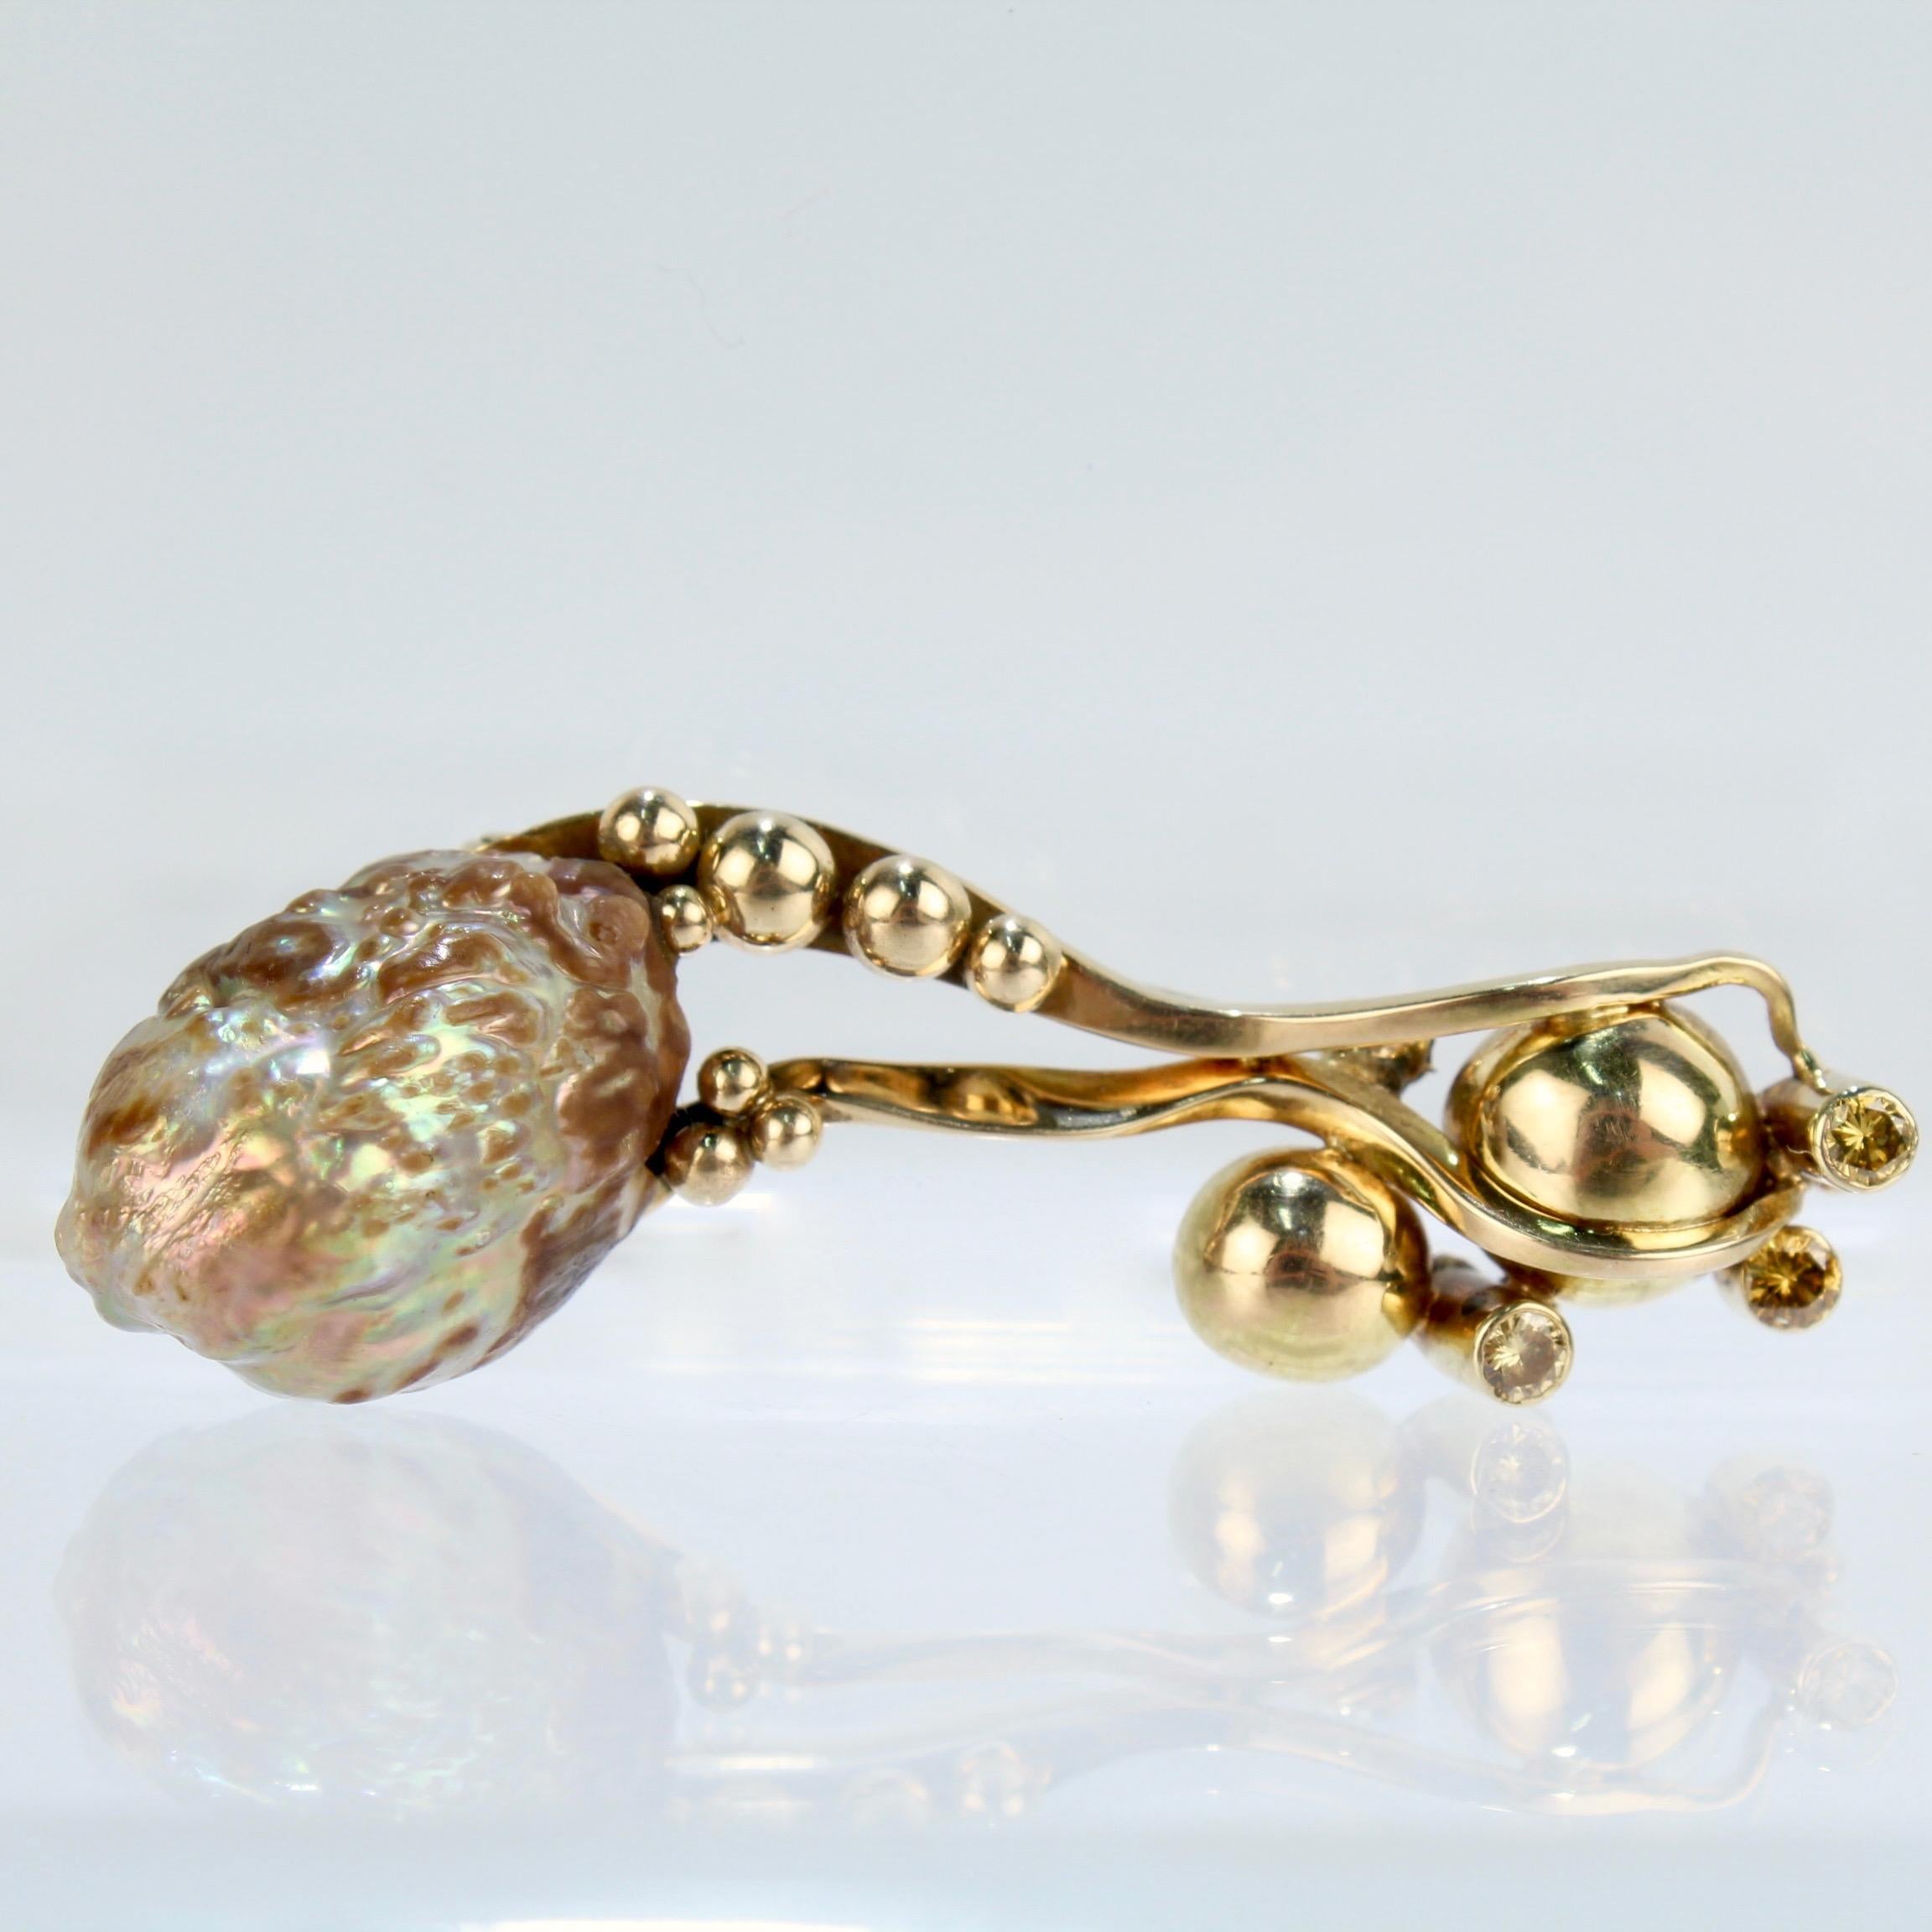 Modernist Biomorphic 14 Karat Gold Yellow Diamond & Baroque Pearl Brooch or Pin For Sale 3